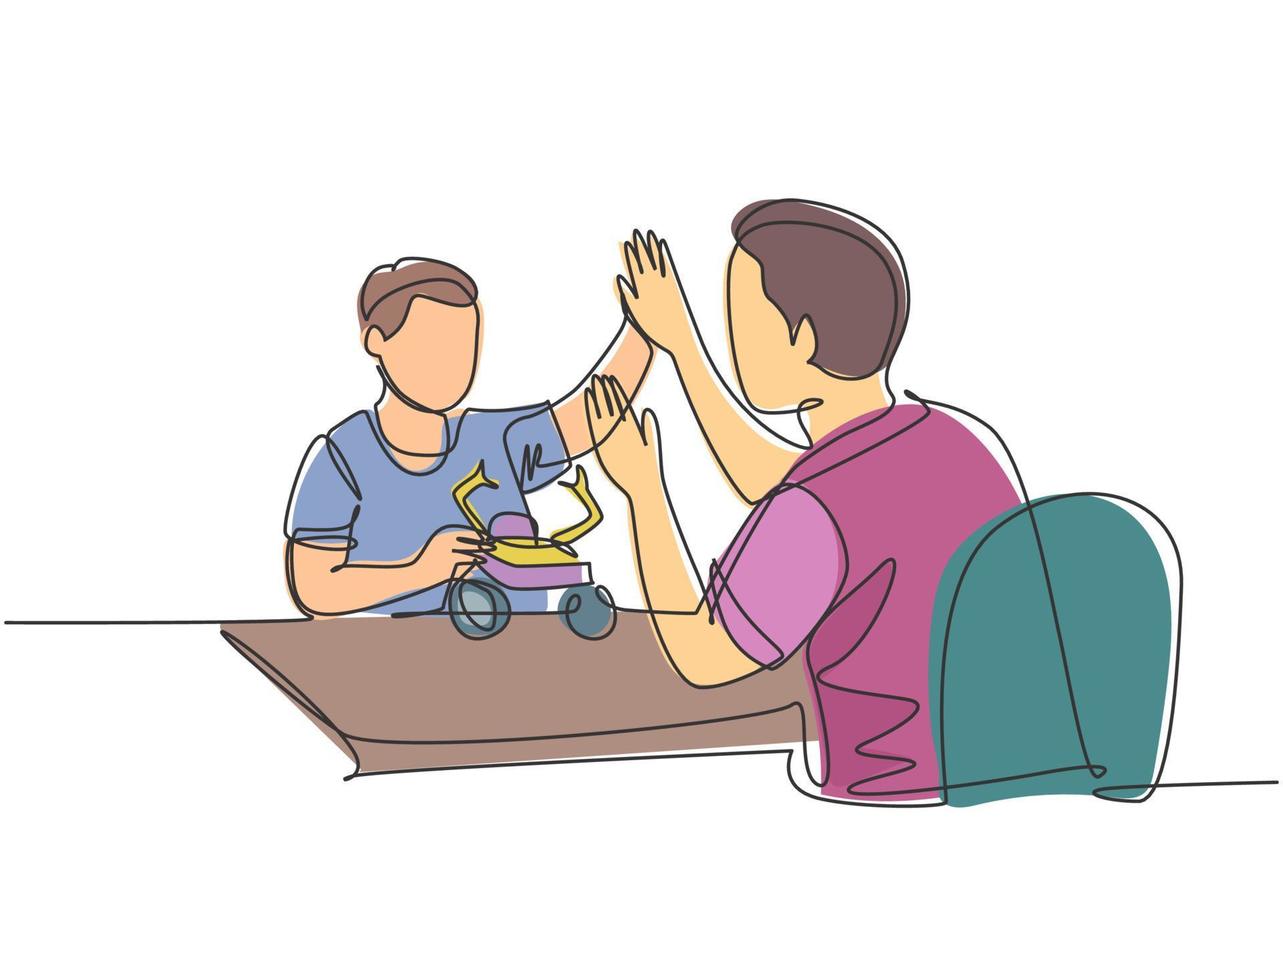 Single line drawing of of father accompany his kid playing a robot action figure model kit and gives high five gesture. Parenting concept continuous line draw design graphic vector illustration